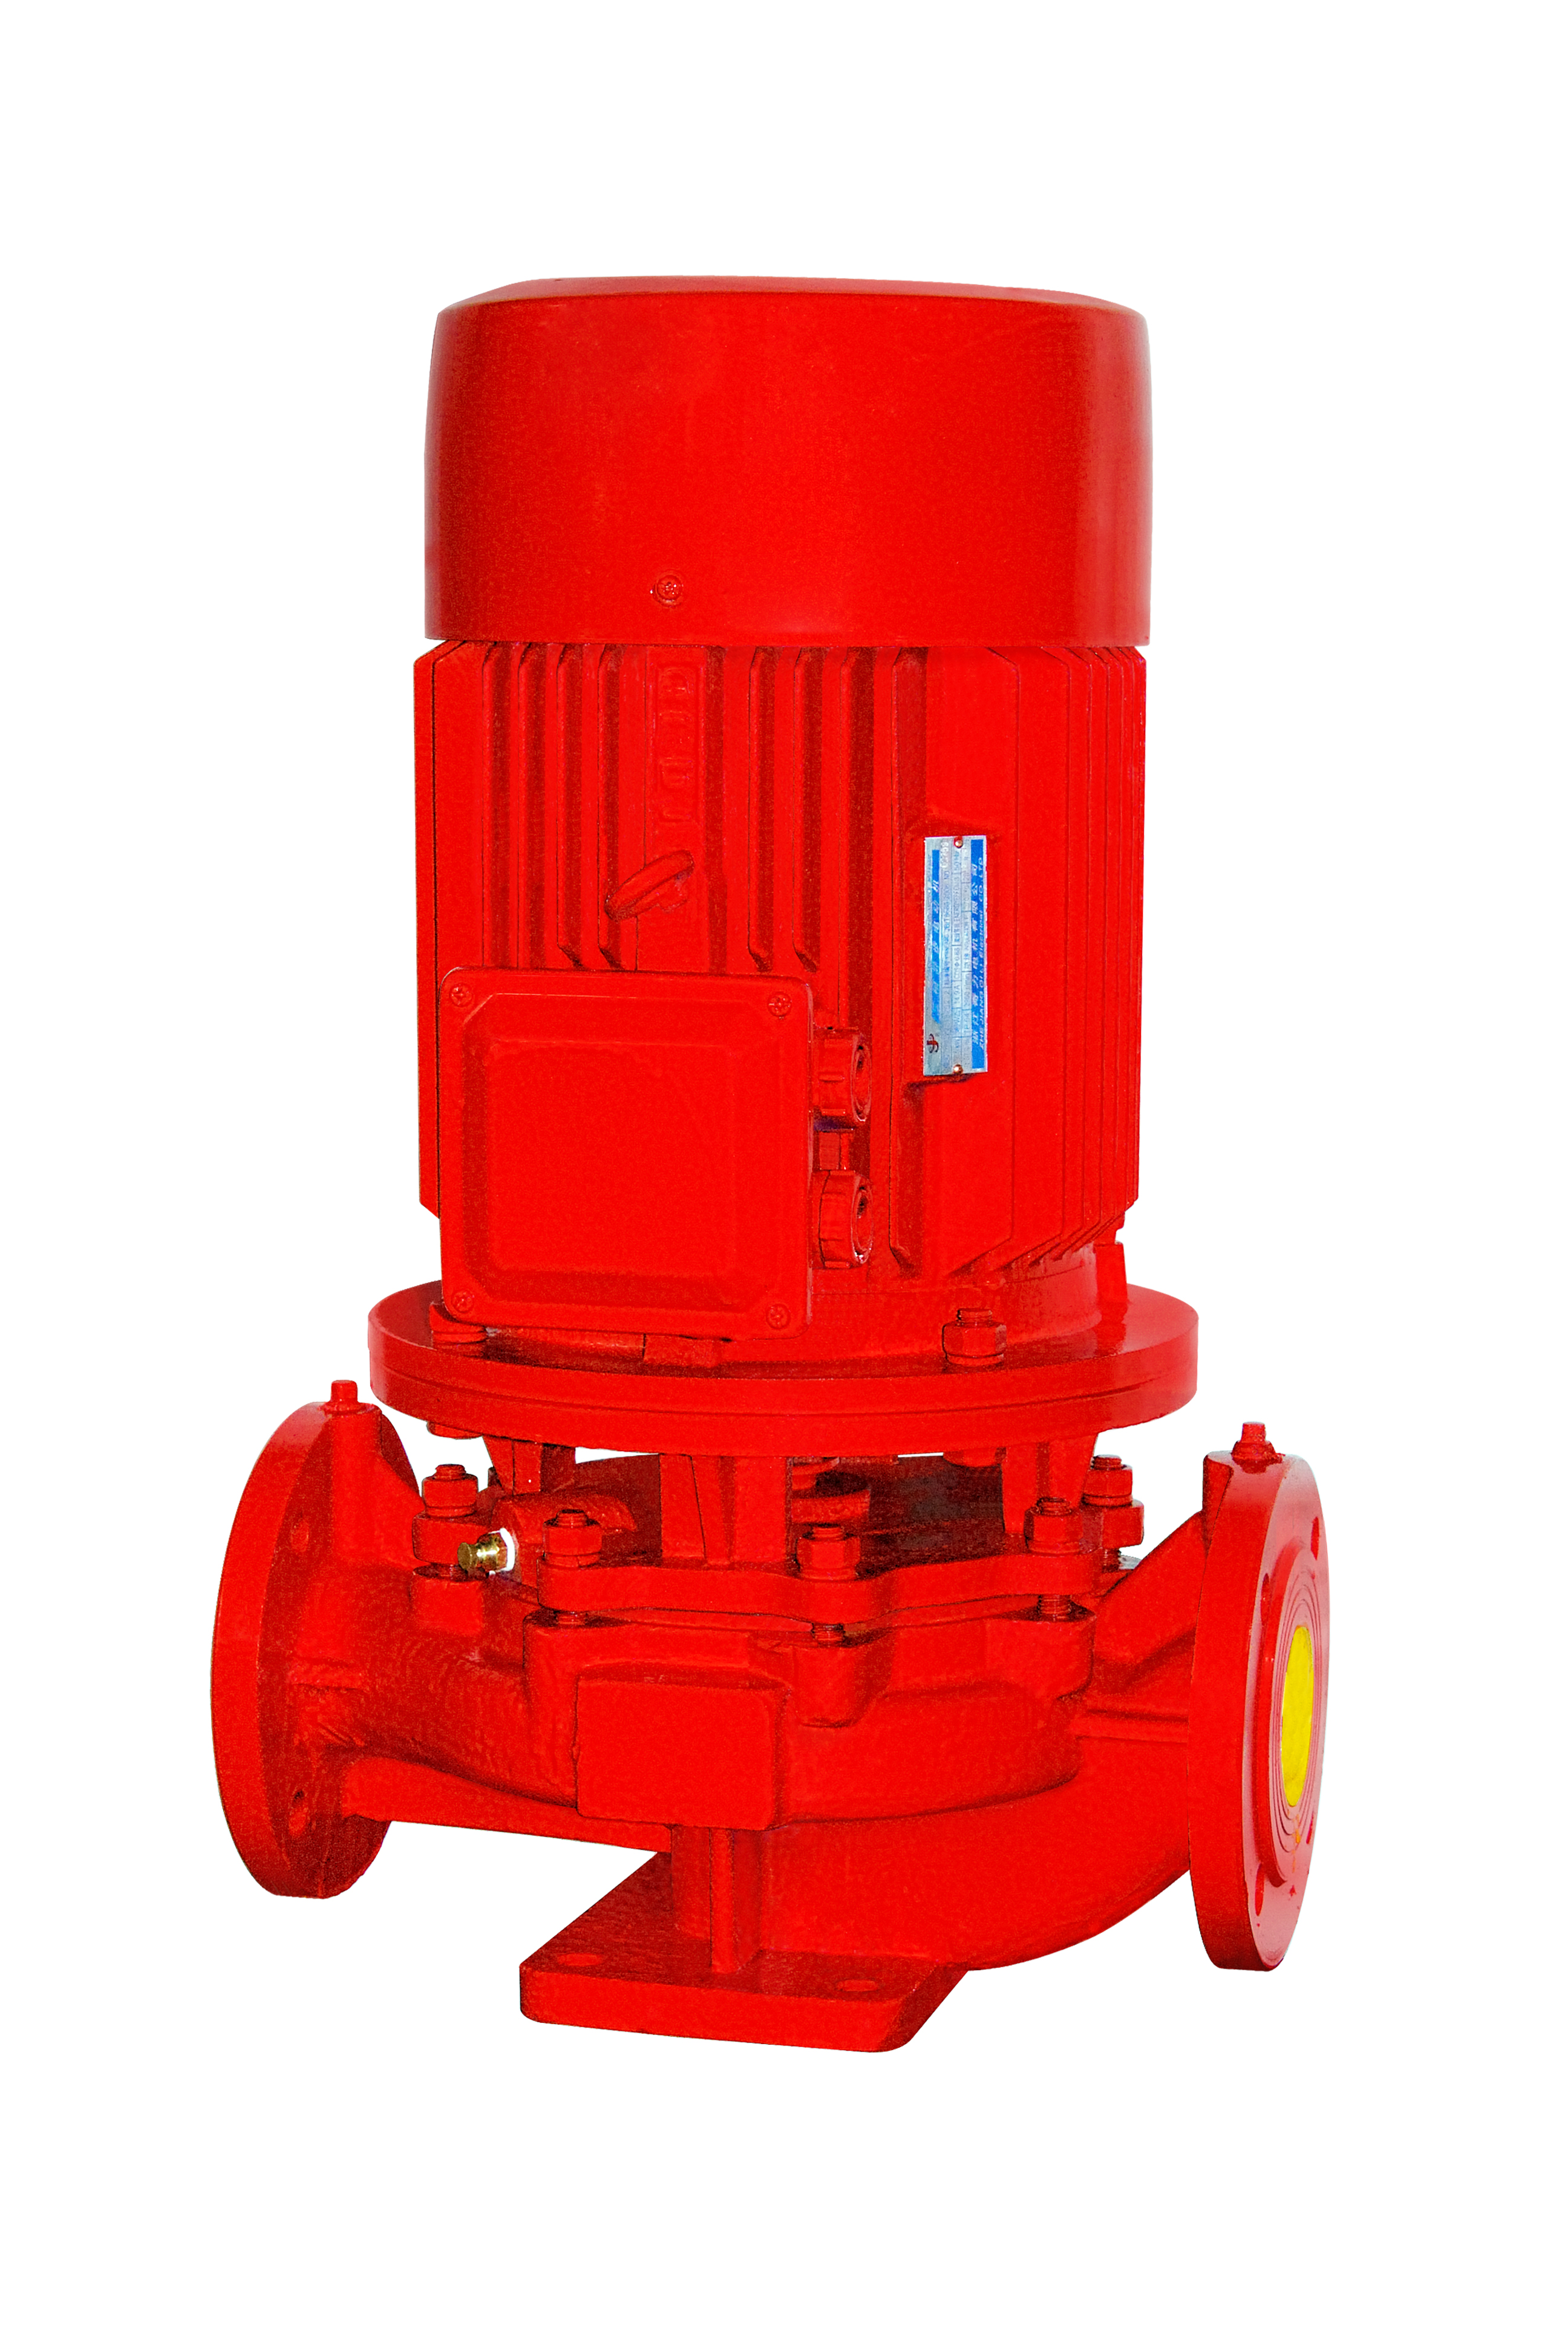 XBD-L Vertical Single Stage Fire fighting Pump